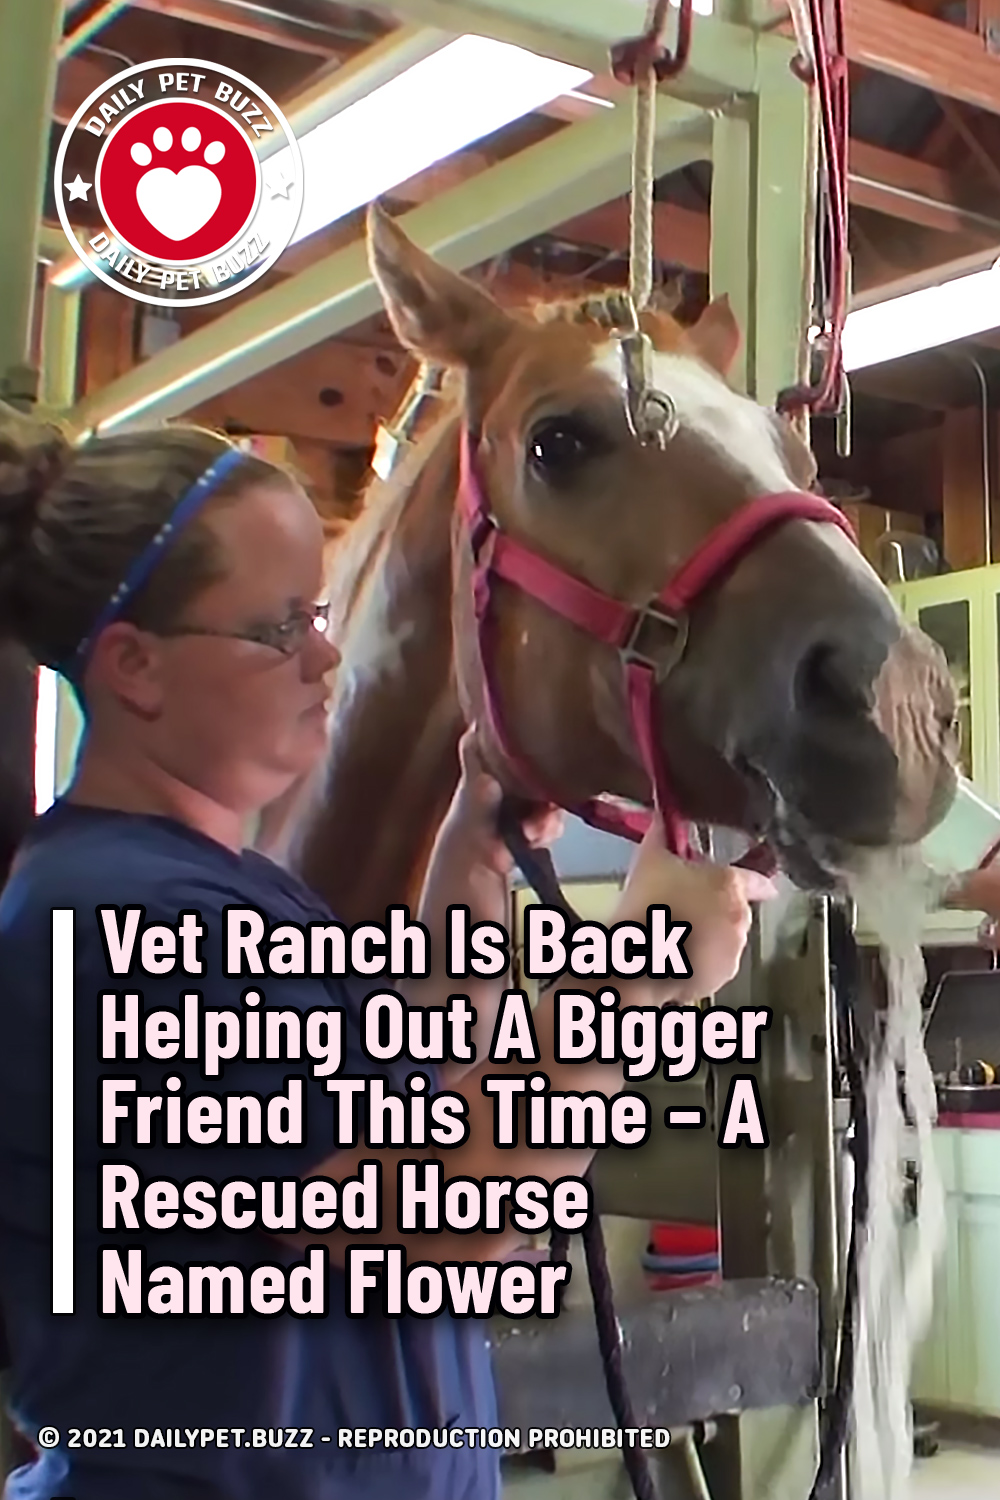 Vet Ranch Is Back Helping Out A Bigger Friend This Time – A Rescued Horse Named Flower